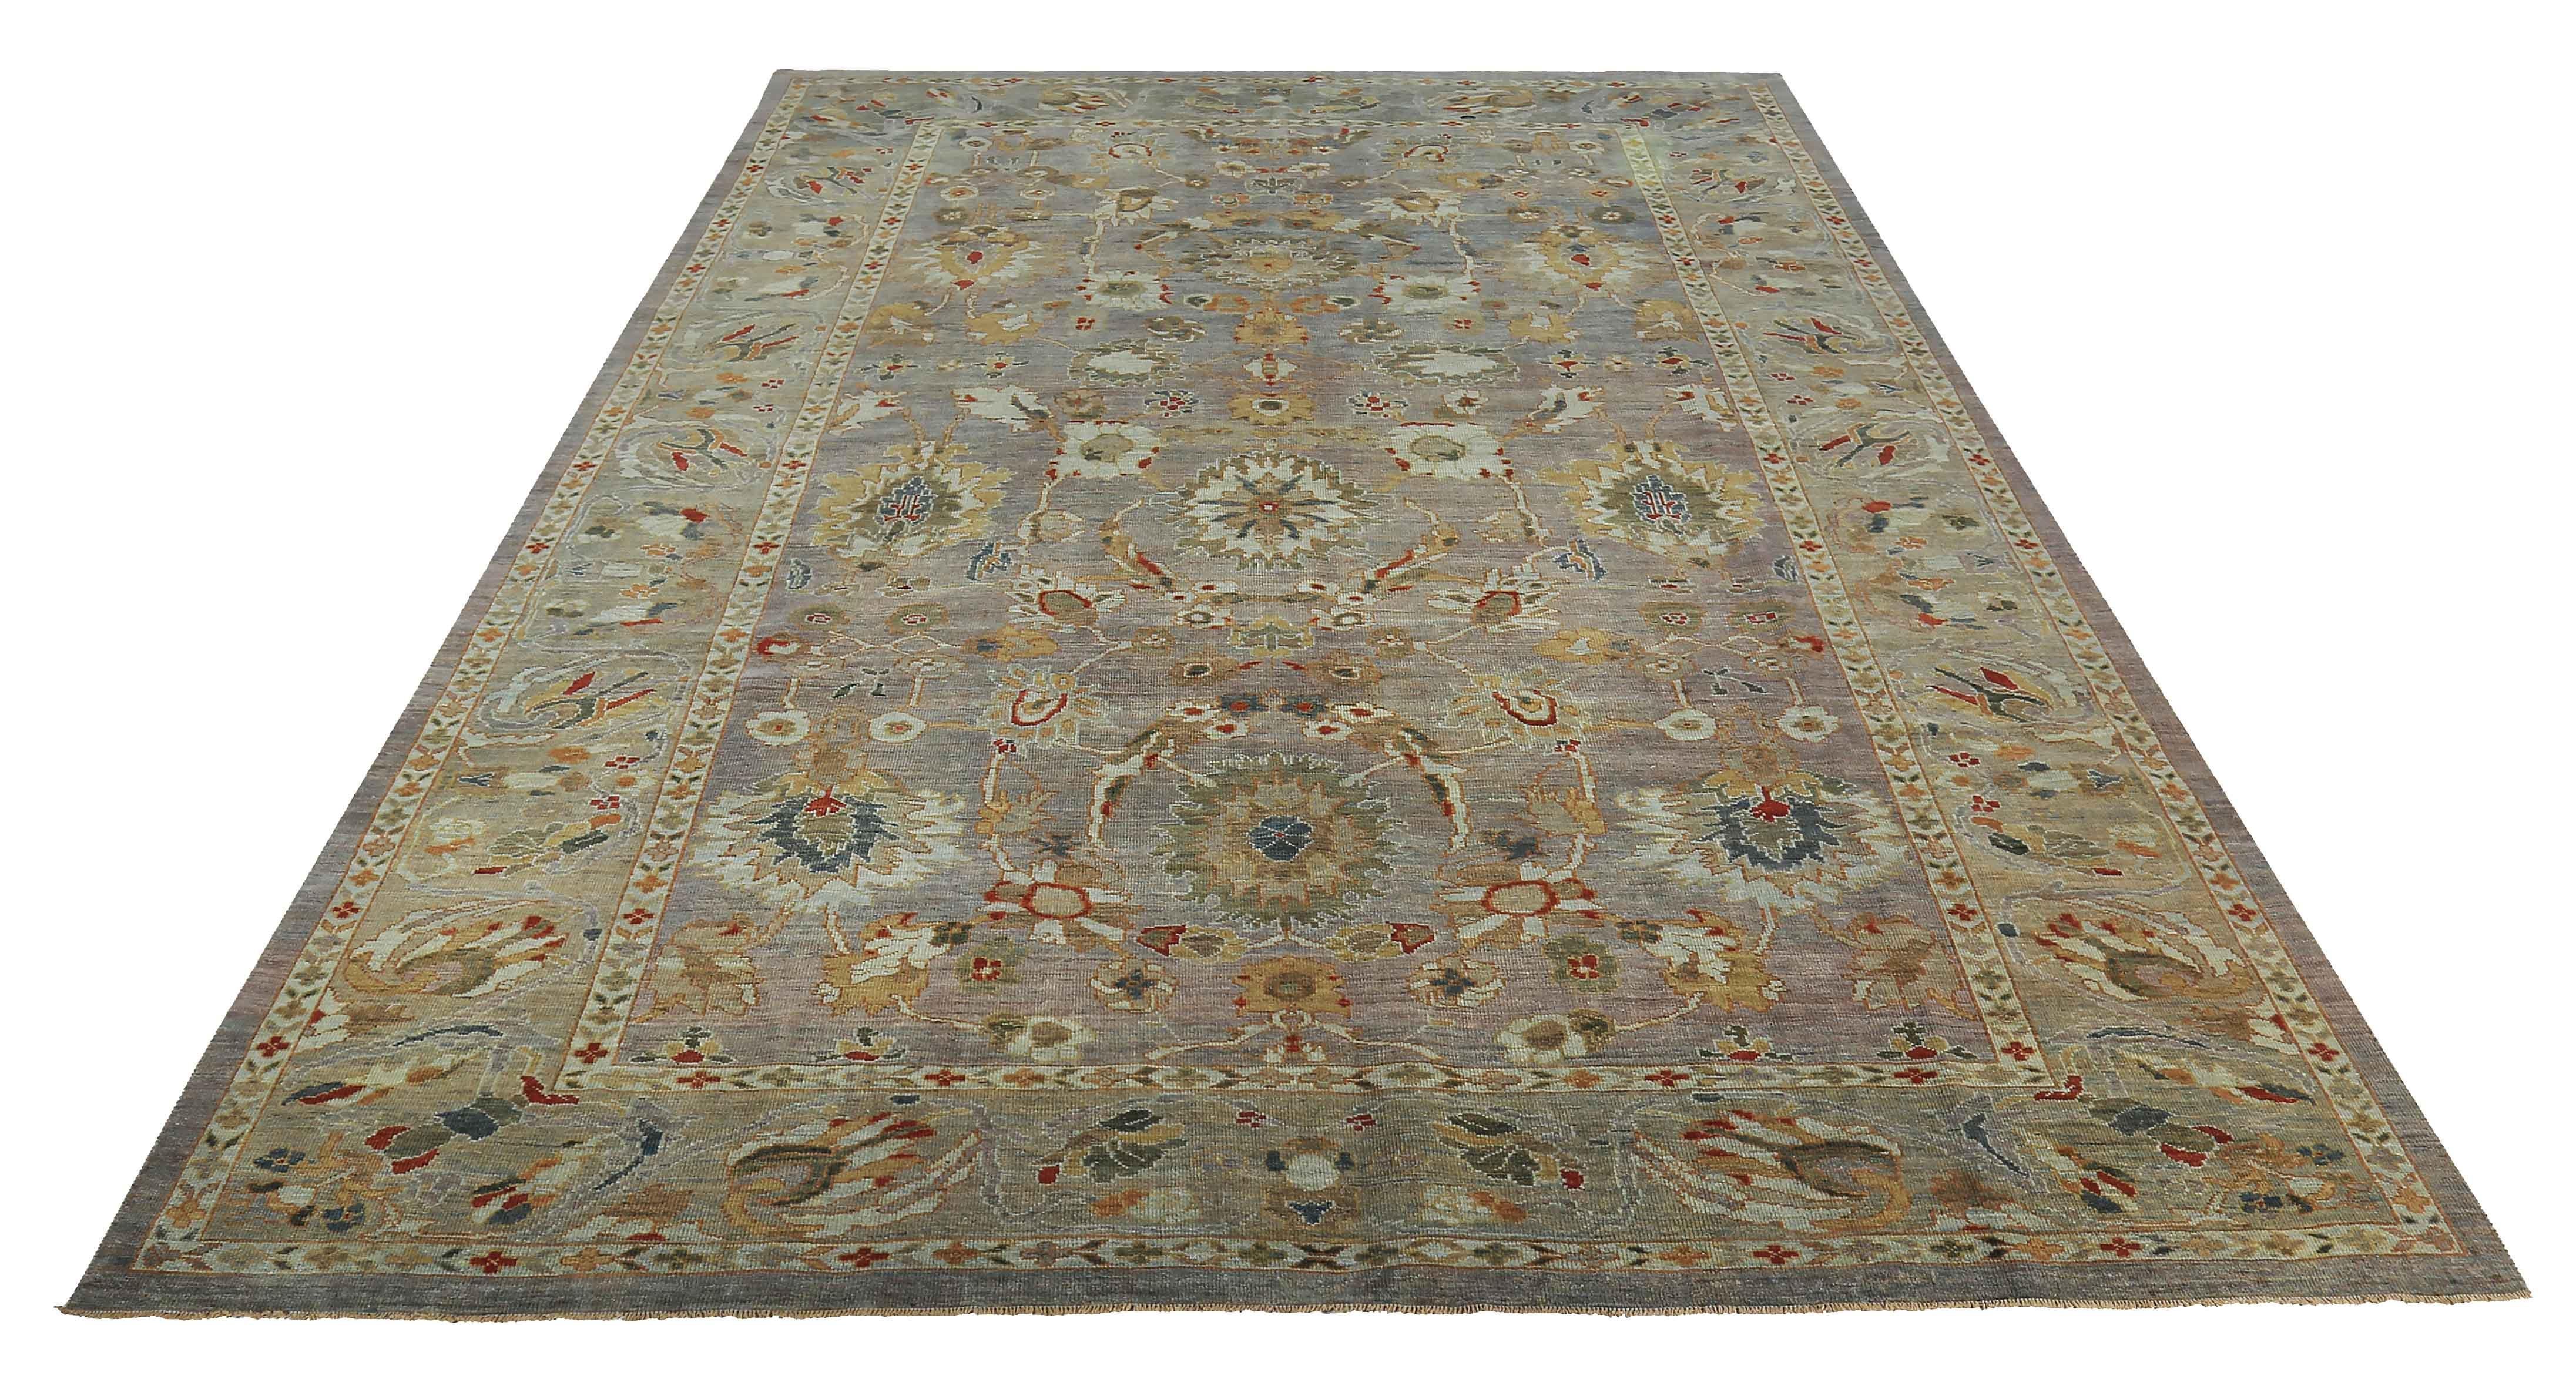 New handmade Turkish area rug from high quality sheep’s wool and colored with eco-friendly vegetable dyes that are proven safe for humans and pets alike. It’s a classic Sultanabad design showcasing a regal gray field with prominent Herati flower